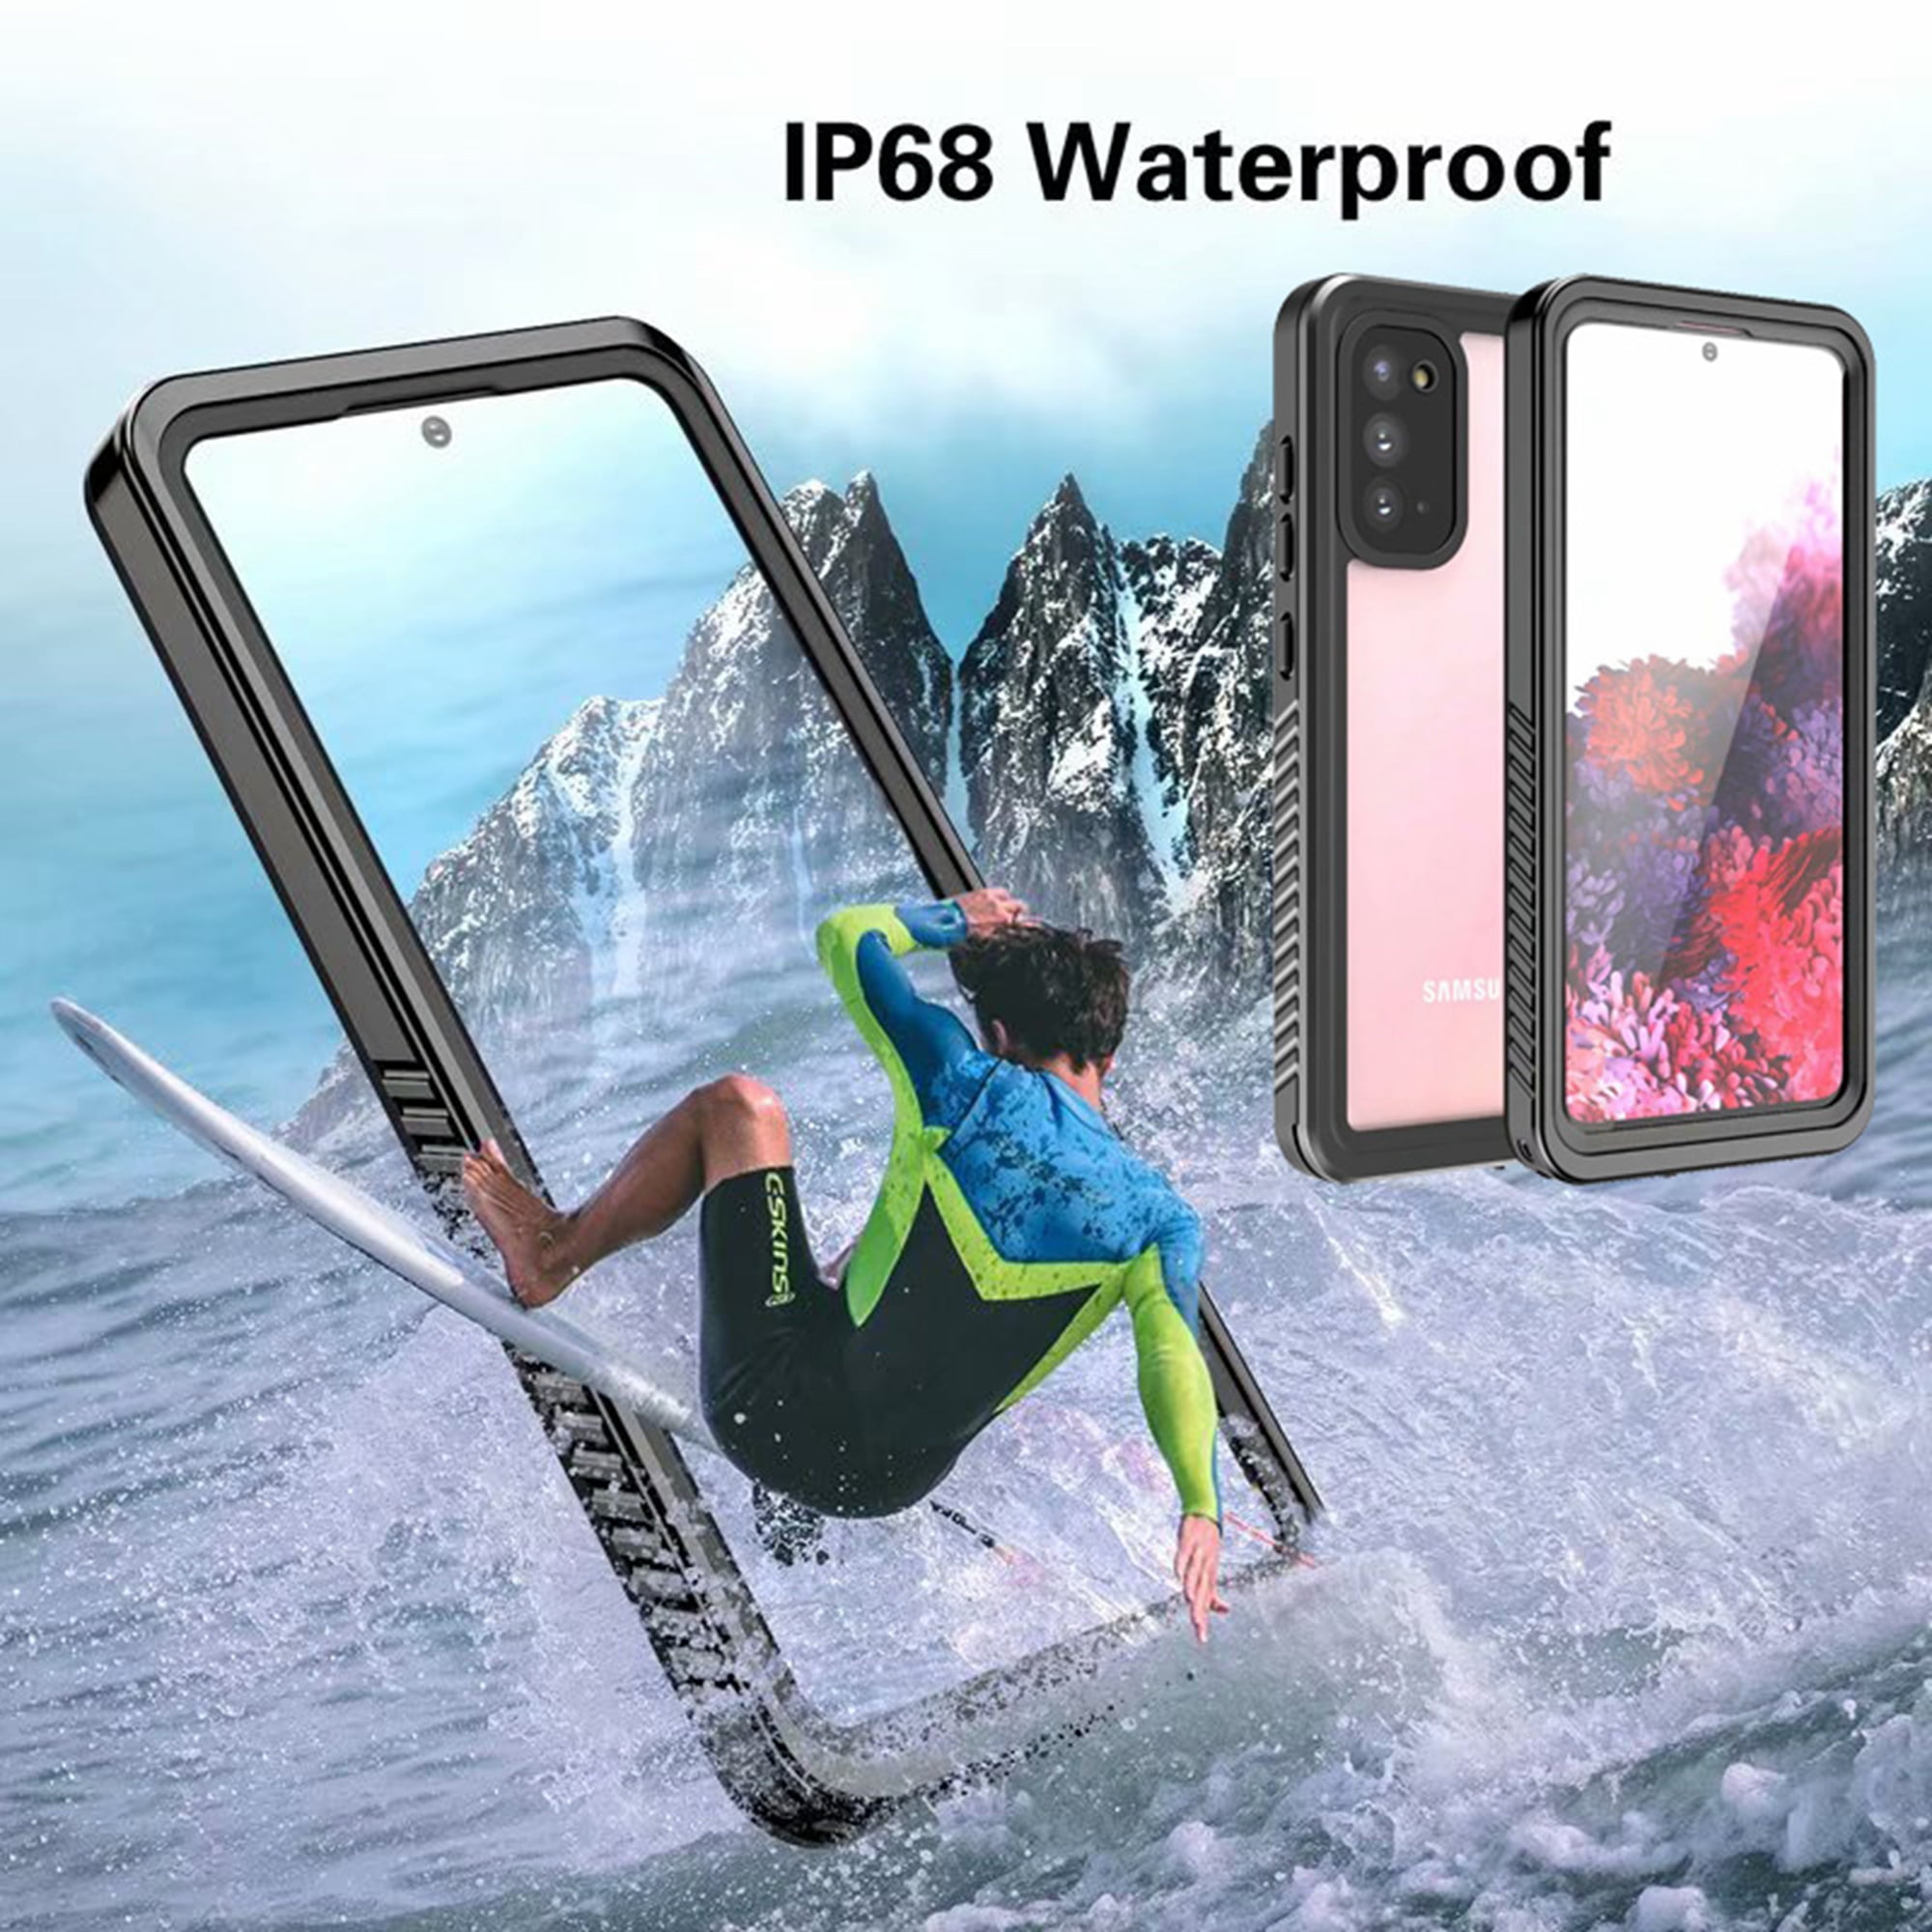 black Samsung Galaxy S20 Waterproof Case With Built-in Screen Protector S20 5G 6.2 IP68 Certified Waterproof Shockproof Dustproof Scrach Resistant Cases Full-Body Rugged Holster for Galaxy S20